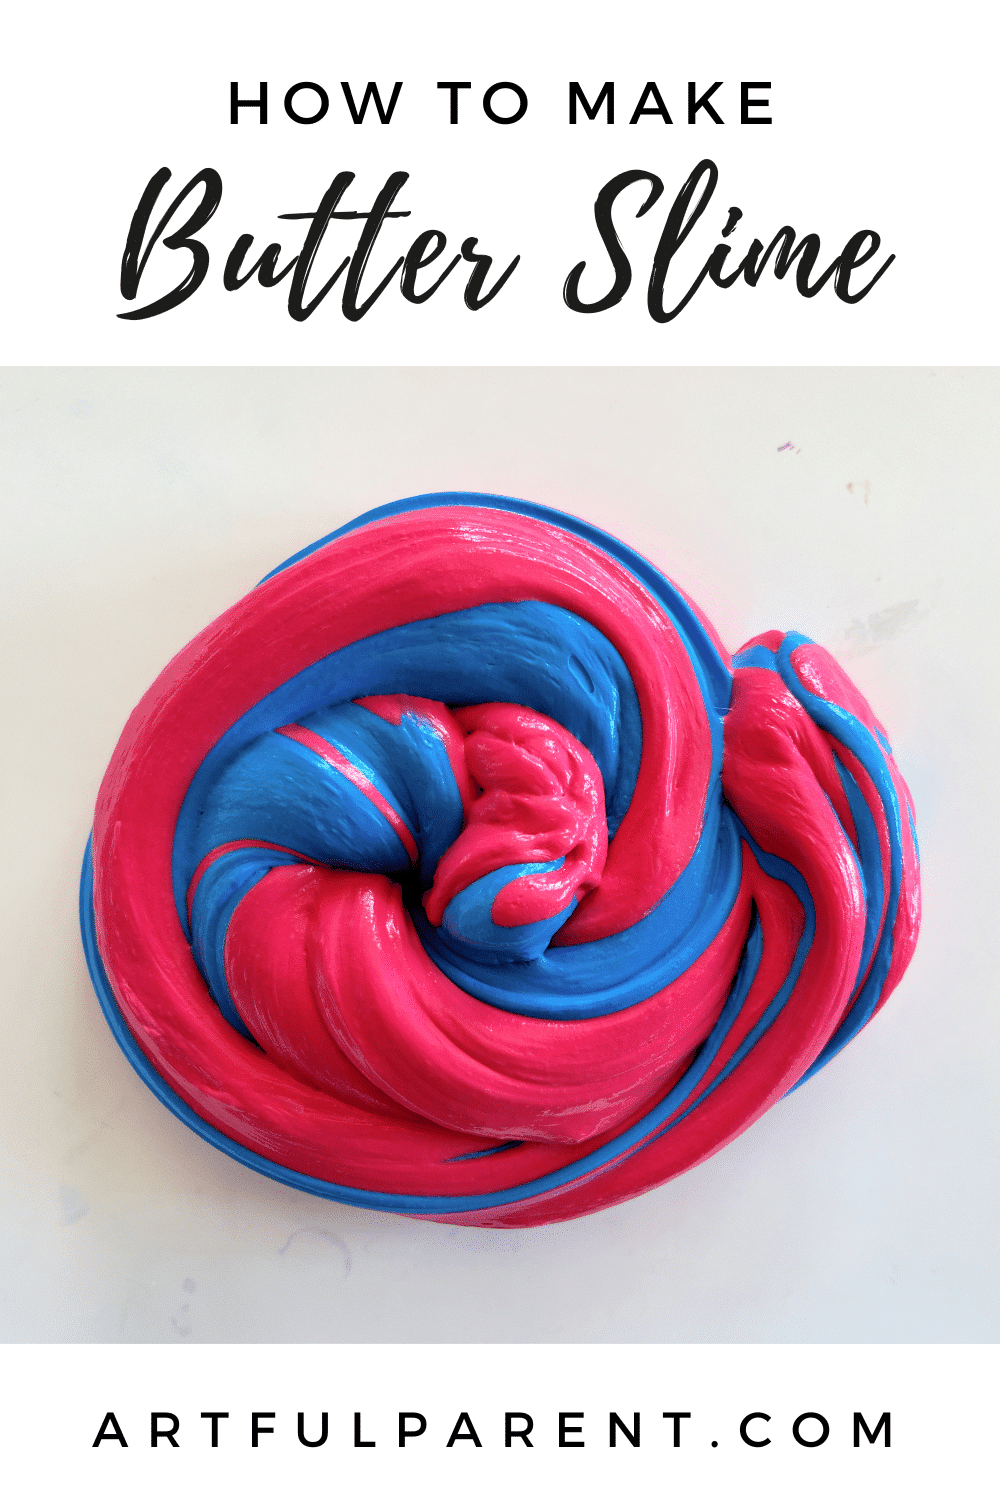 How to Make Butter Slime